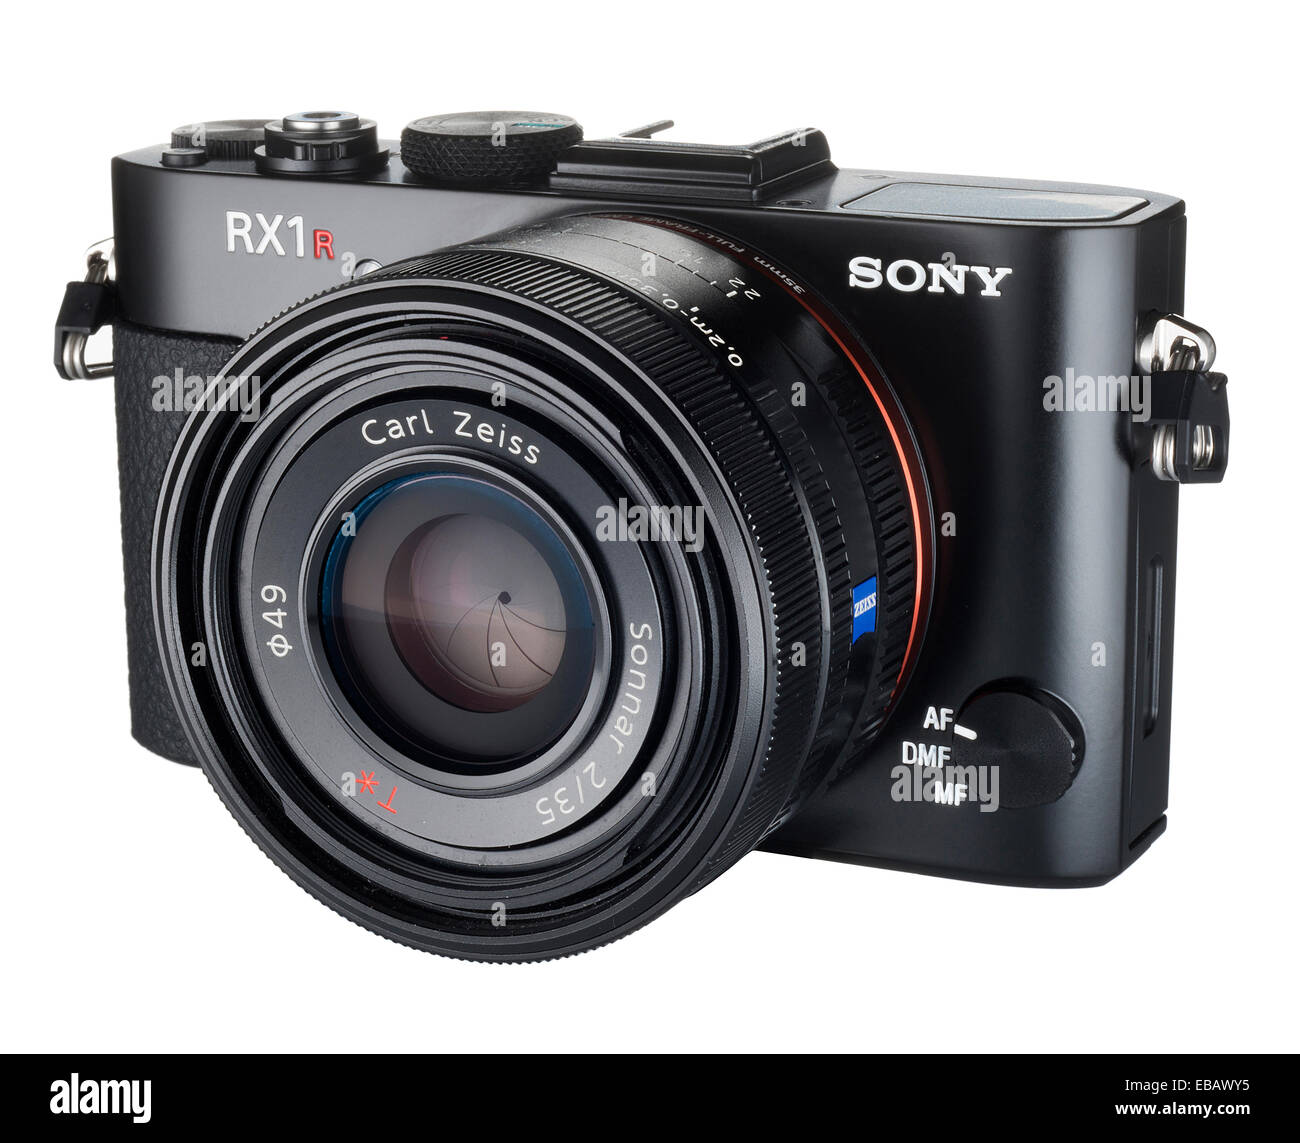 Sony RX1R digital compact camera with 35mm CMOS sensor and Carl Zeiss lens. Stock Photo